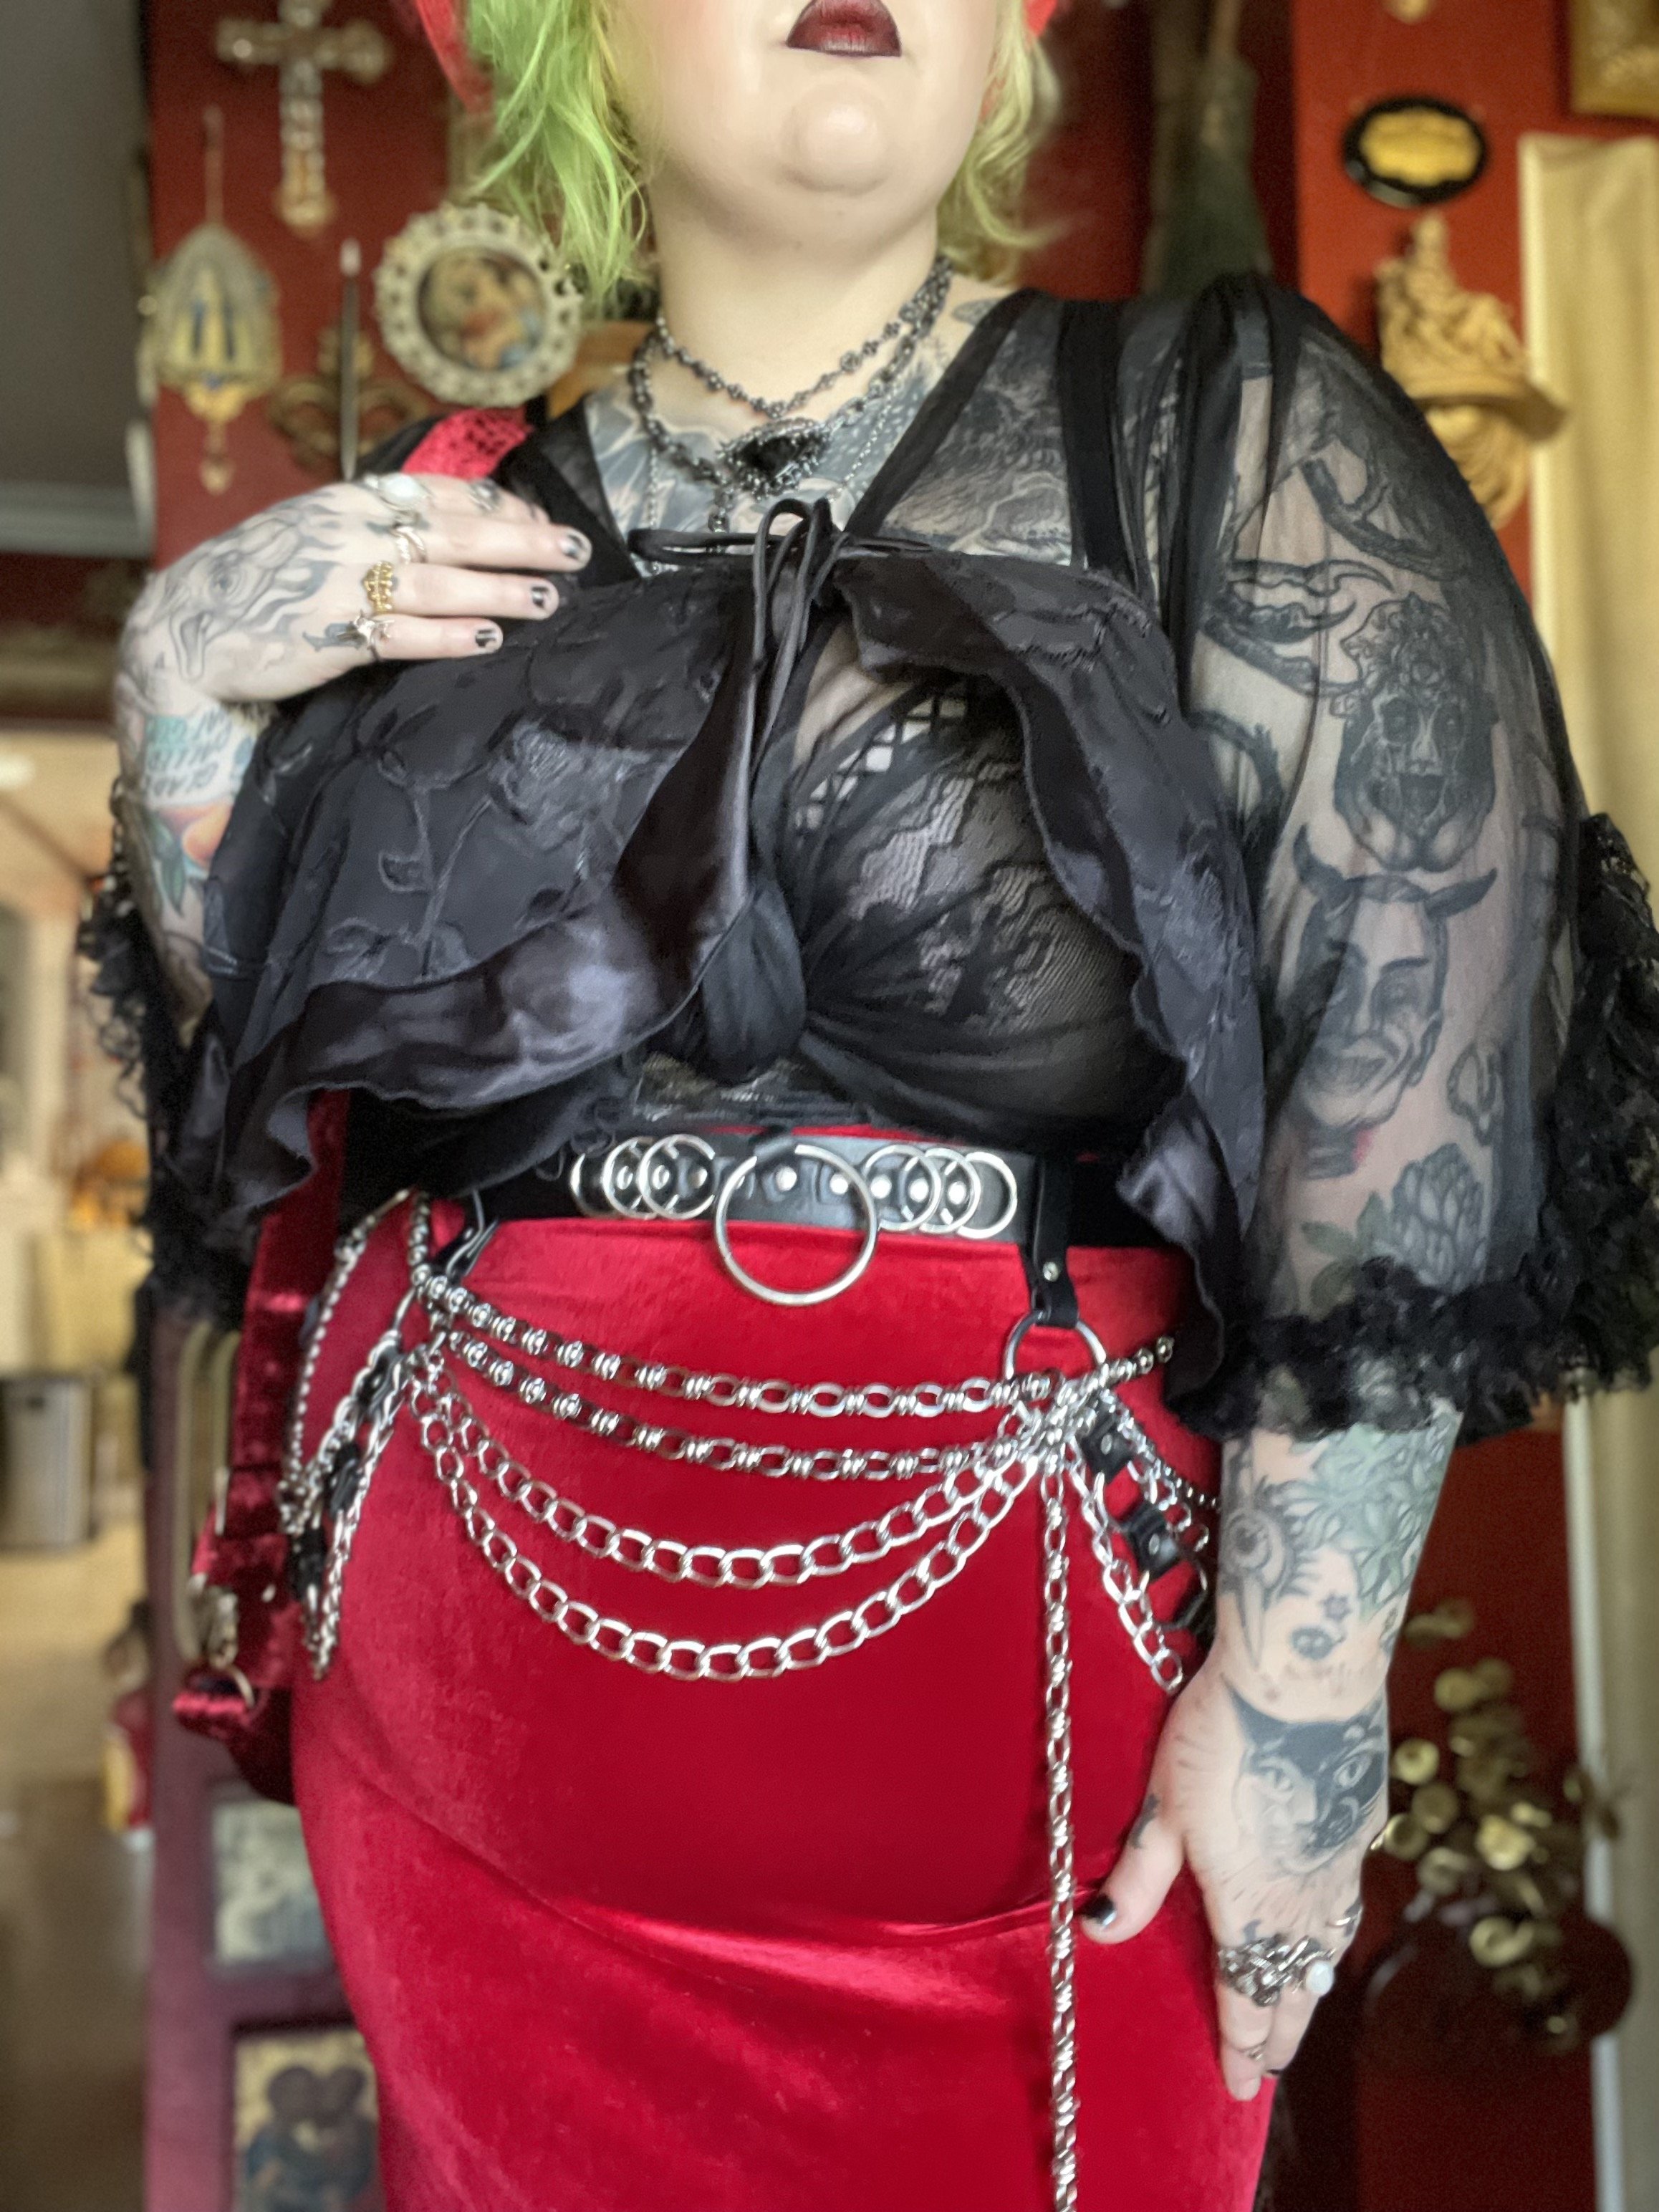 Draculacorsets - We have a whole line of new extreme waist corsets